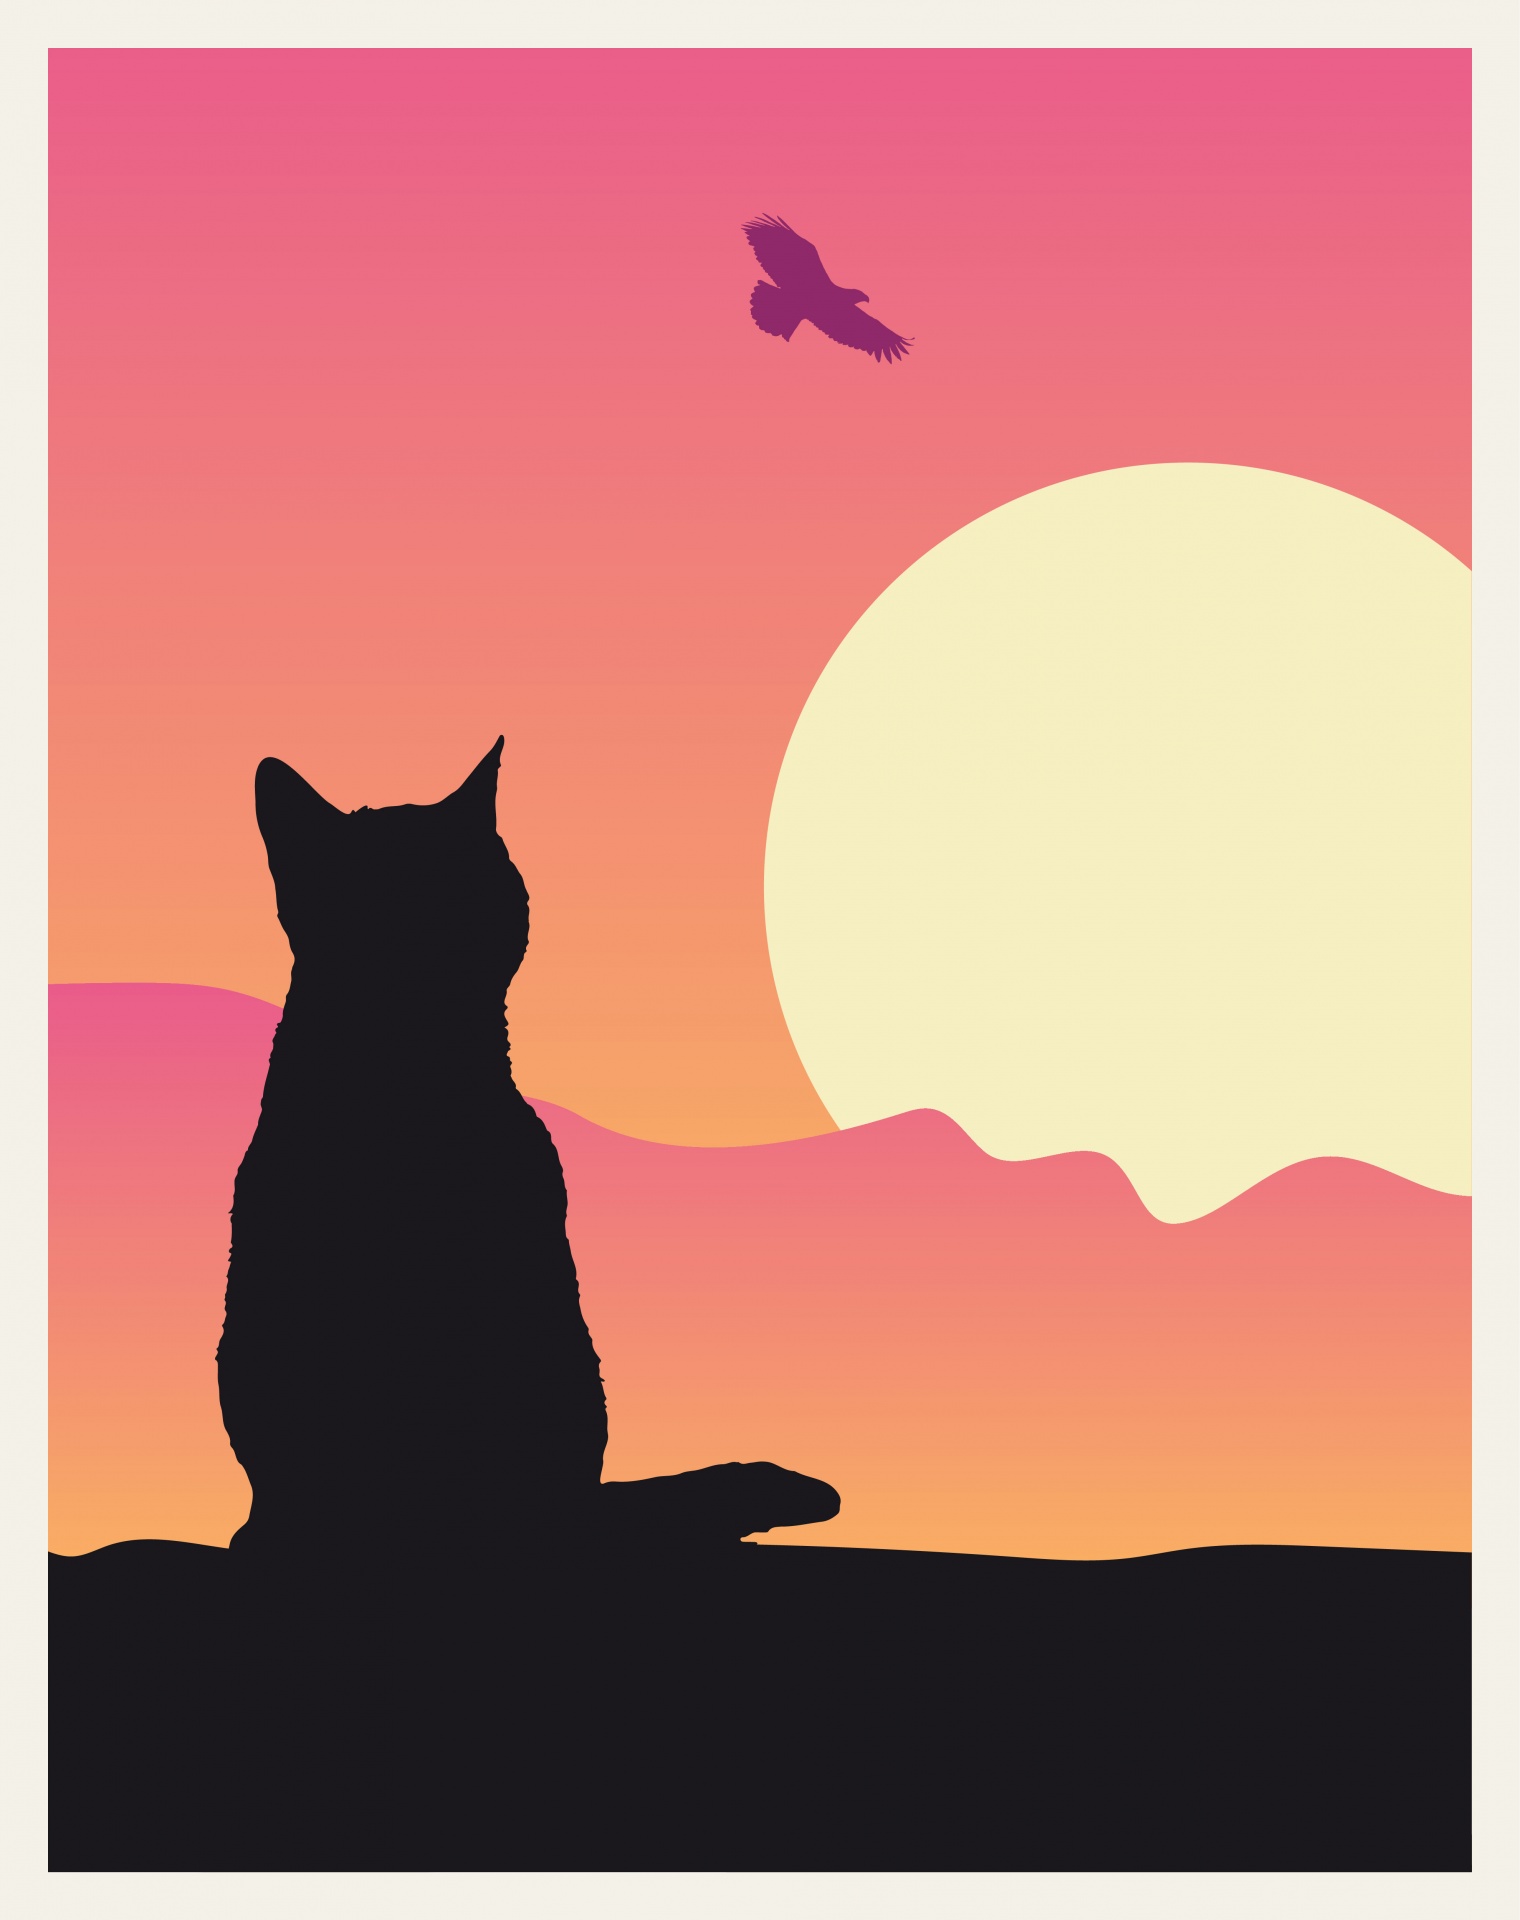 Pink sunset with silhouette of black sitting cat watch a bird flying over the sun, poster, print, wall art, card